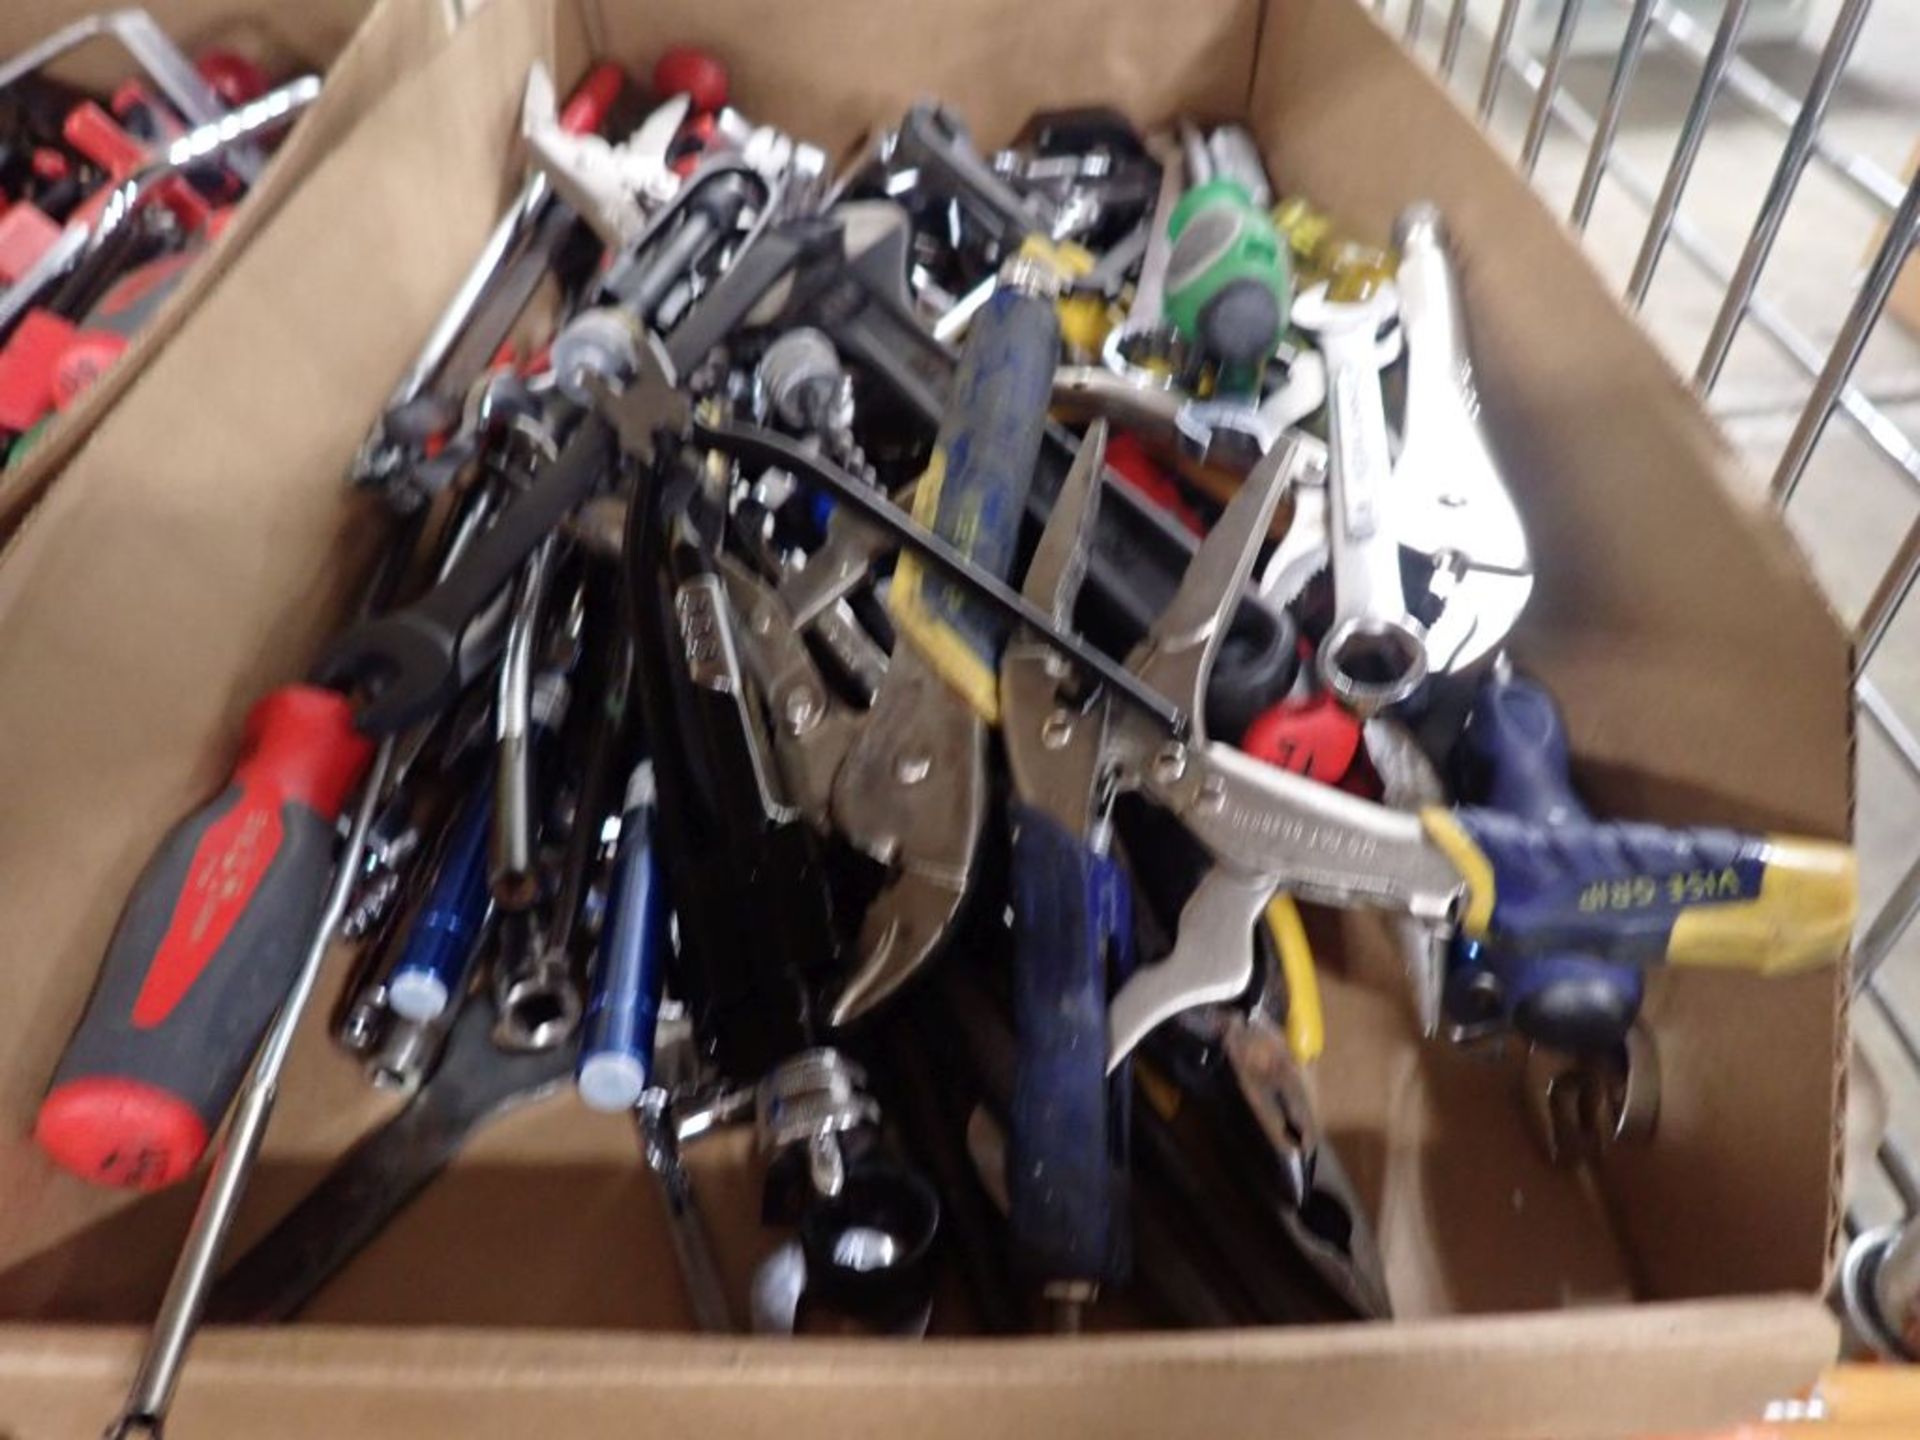 Lot of Assorted Tools | Tag: 241626 | Limited Forklift Assistance Available - $10.00 Lot Loading - Image 6 of 6